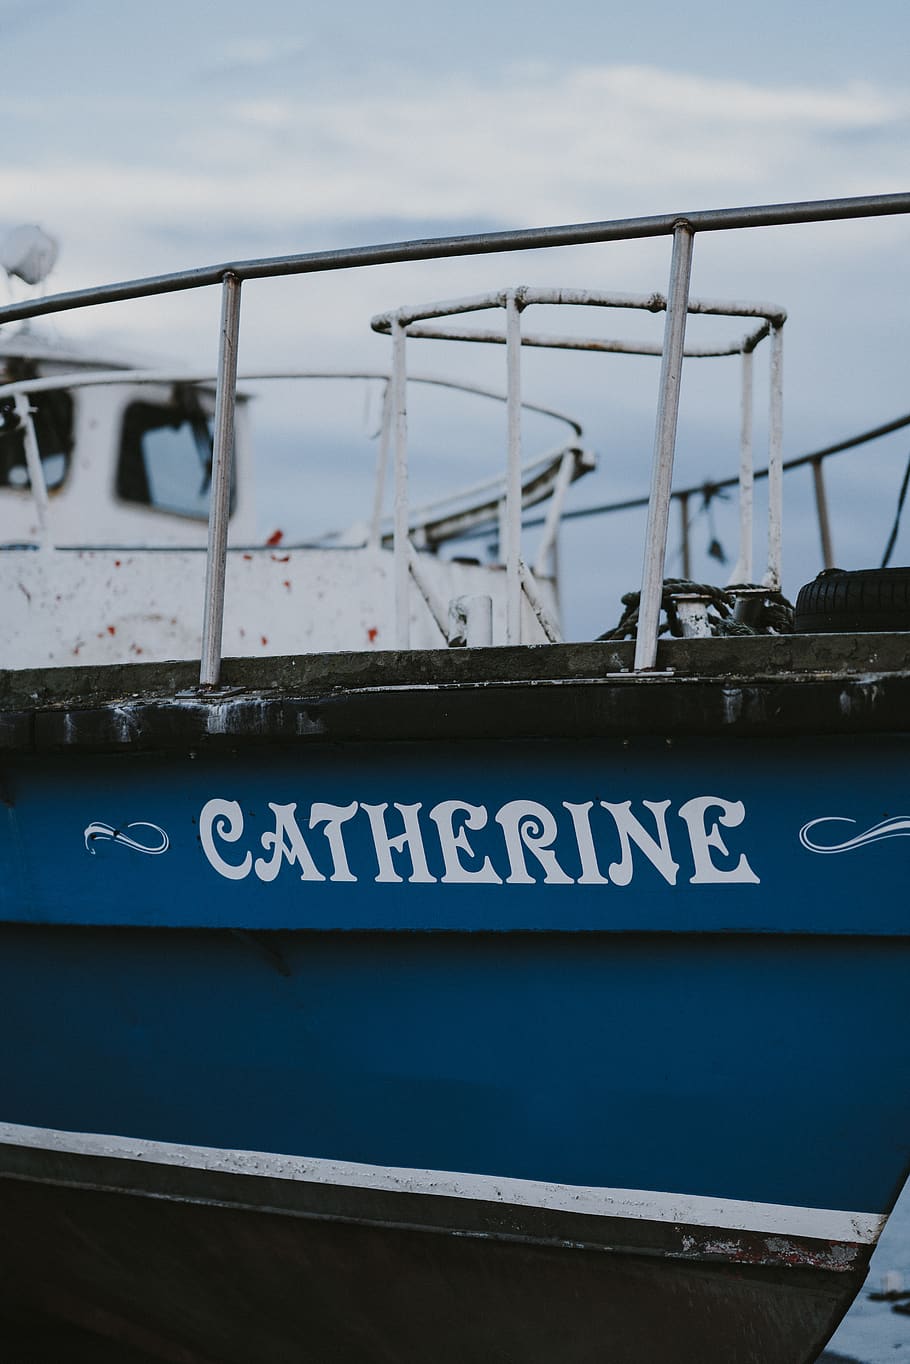 blue and white Catherine boat close-up photography, vehicle, transportation, HD wallpaper